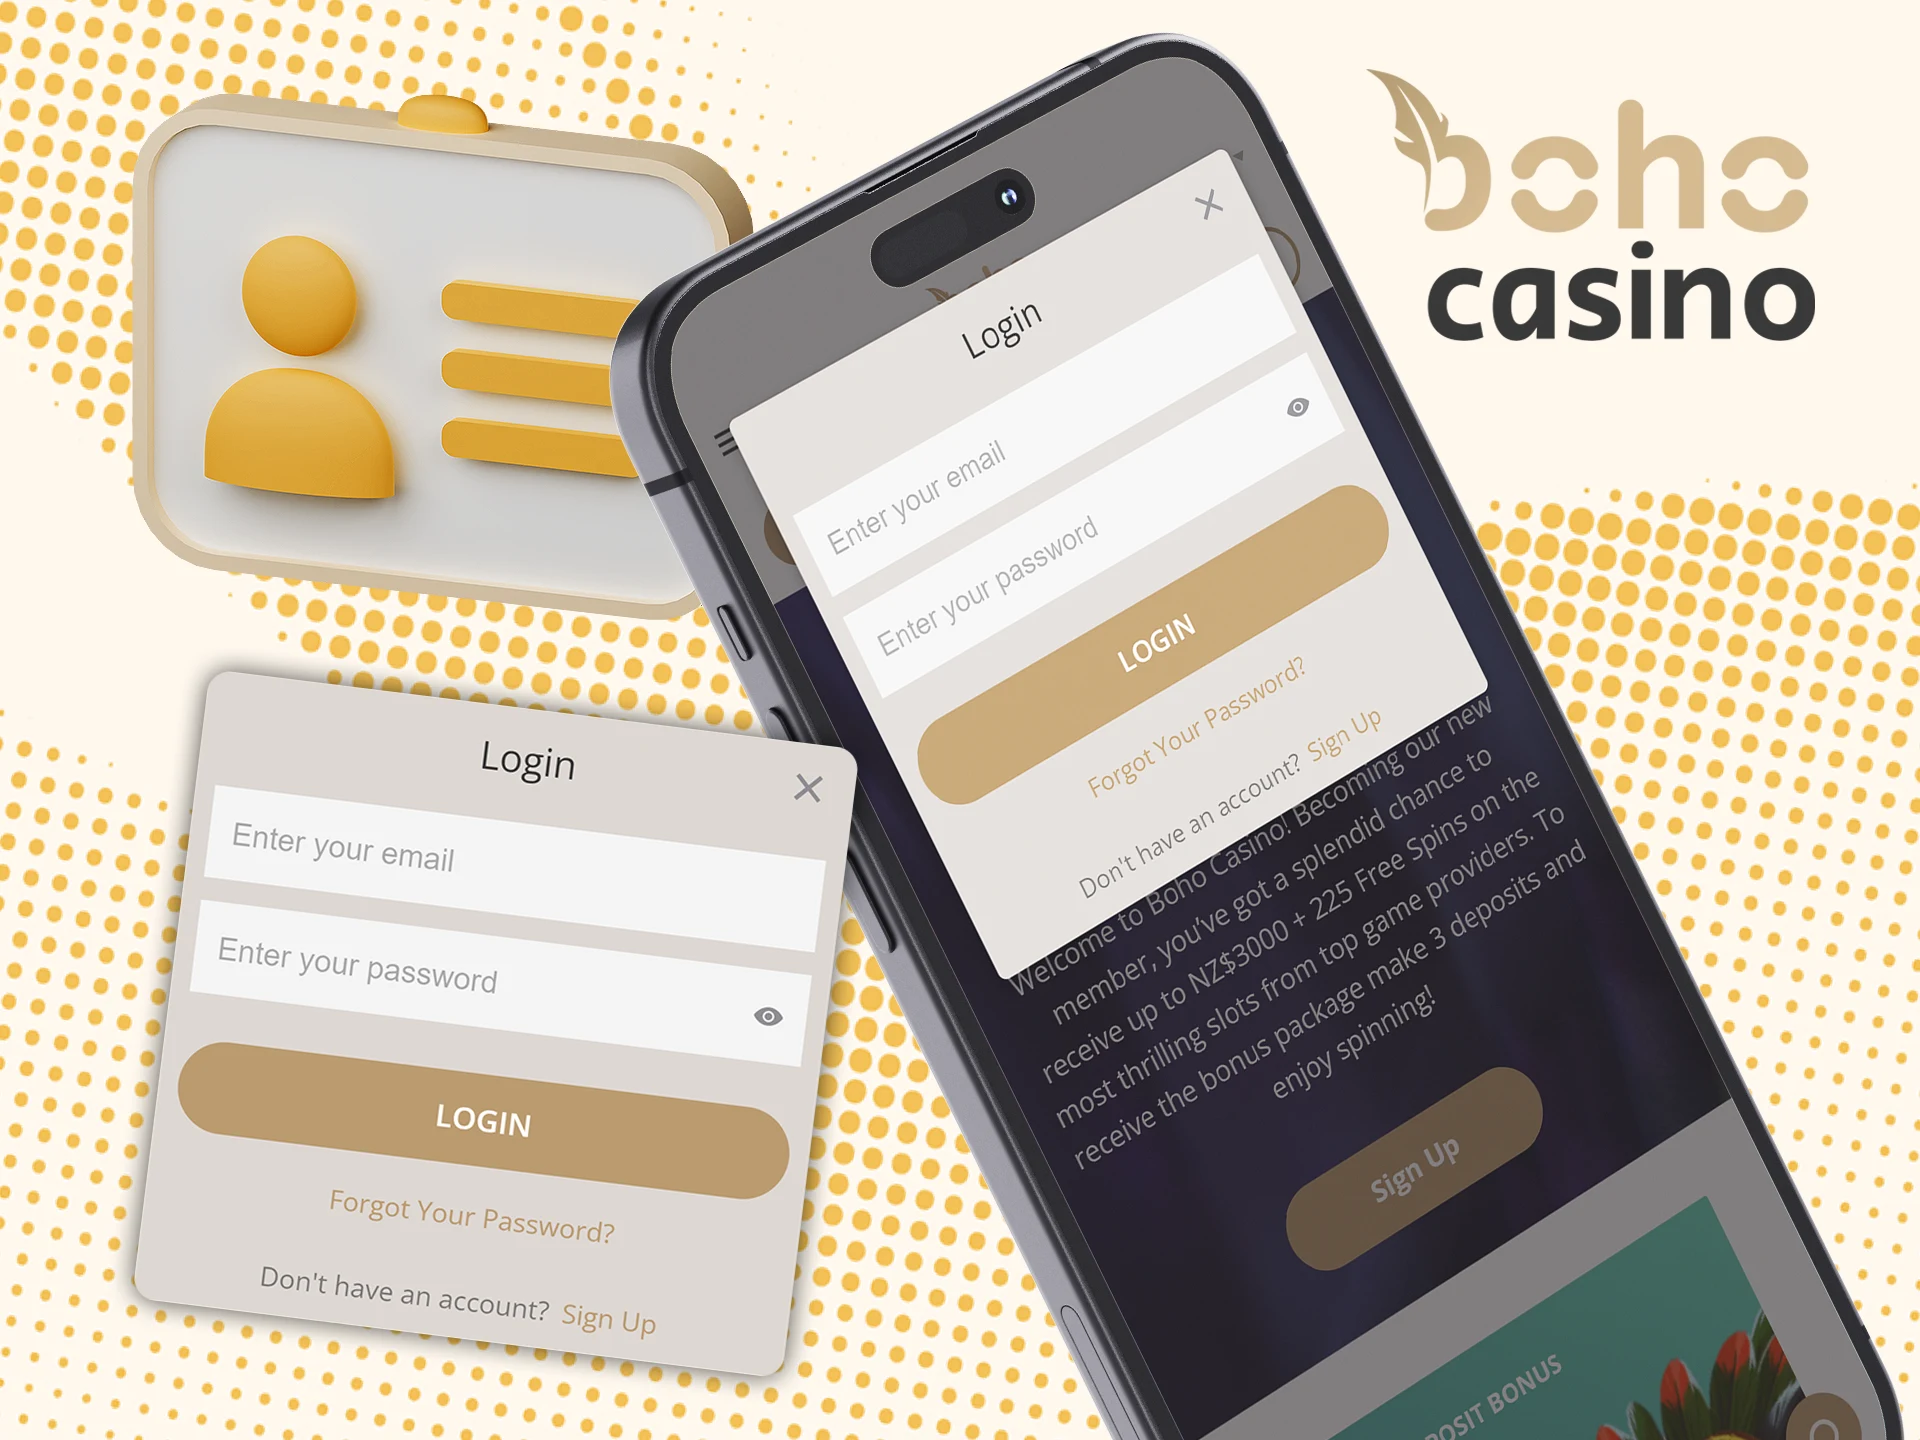 Enter your email and password to access your account via Boho Casino app.